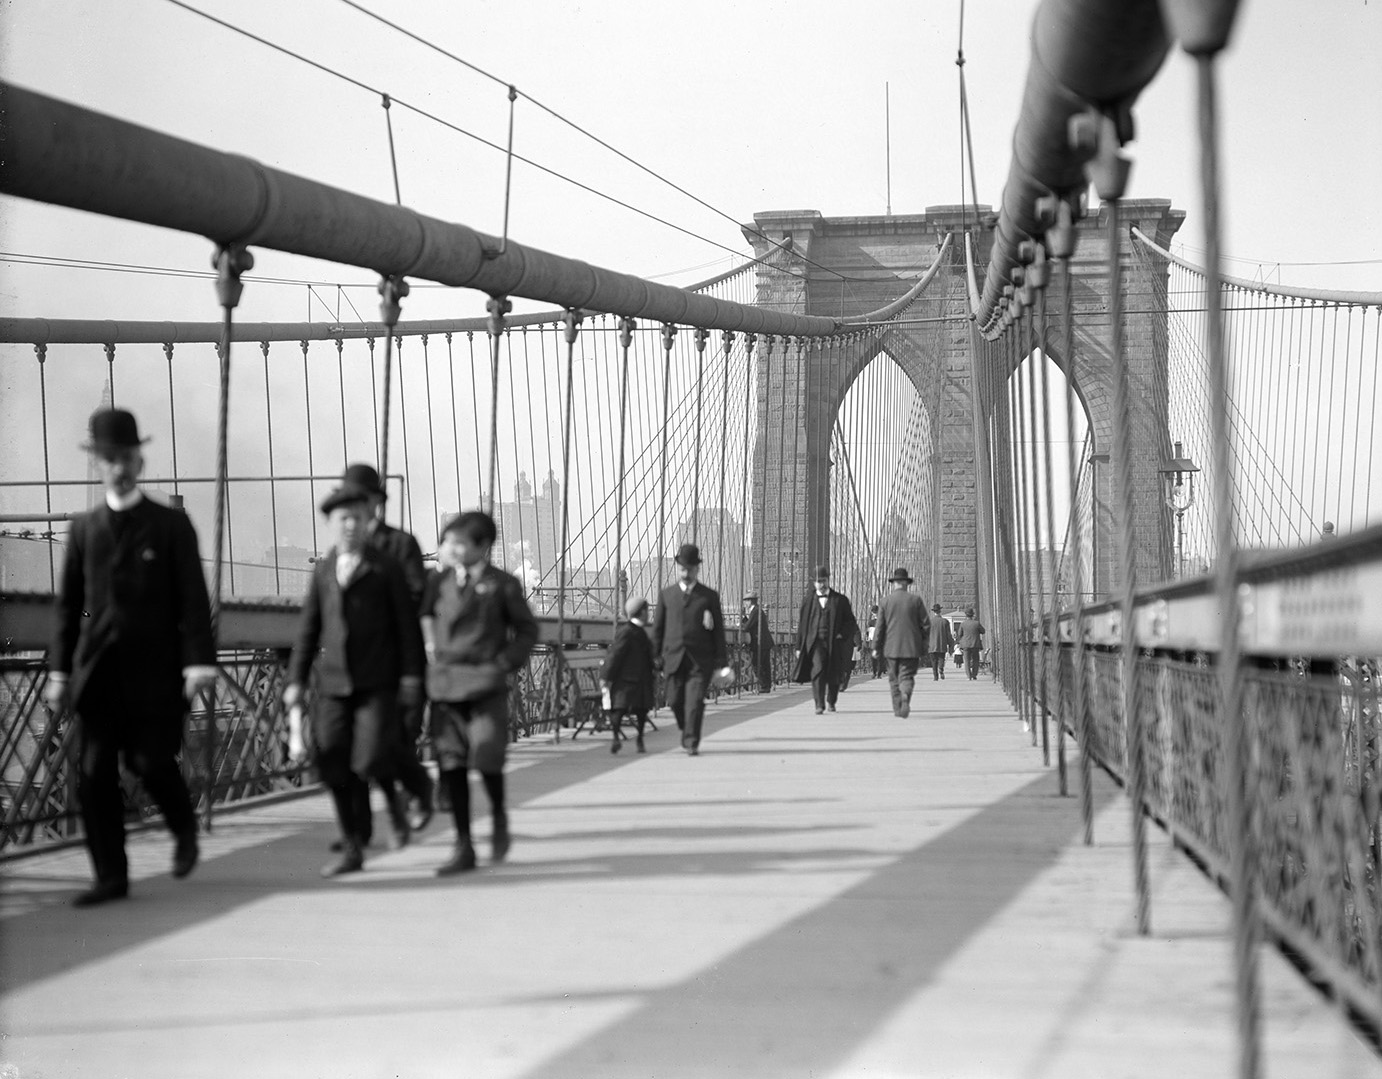 The Brooklyn Bridge in the early 20th century. Photo via the Library of Congress